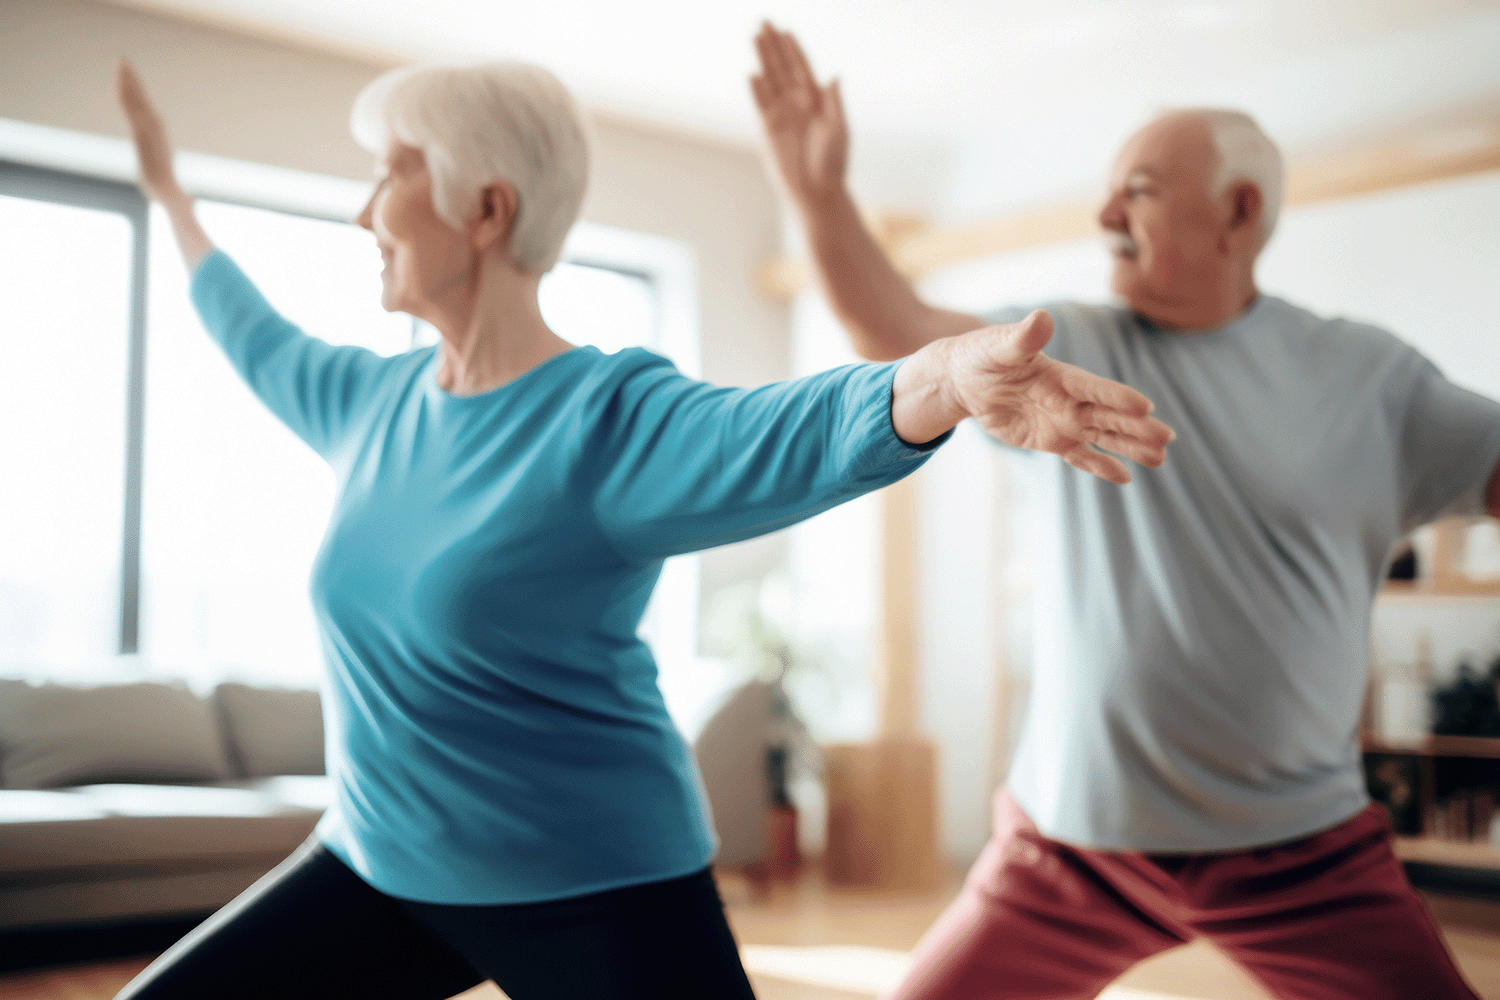 Fall Prevention Tips: Caring for Aging Parents